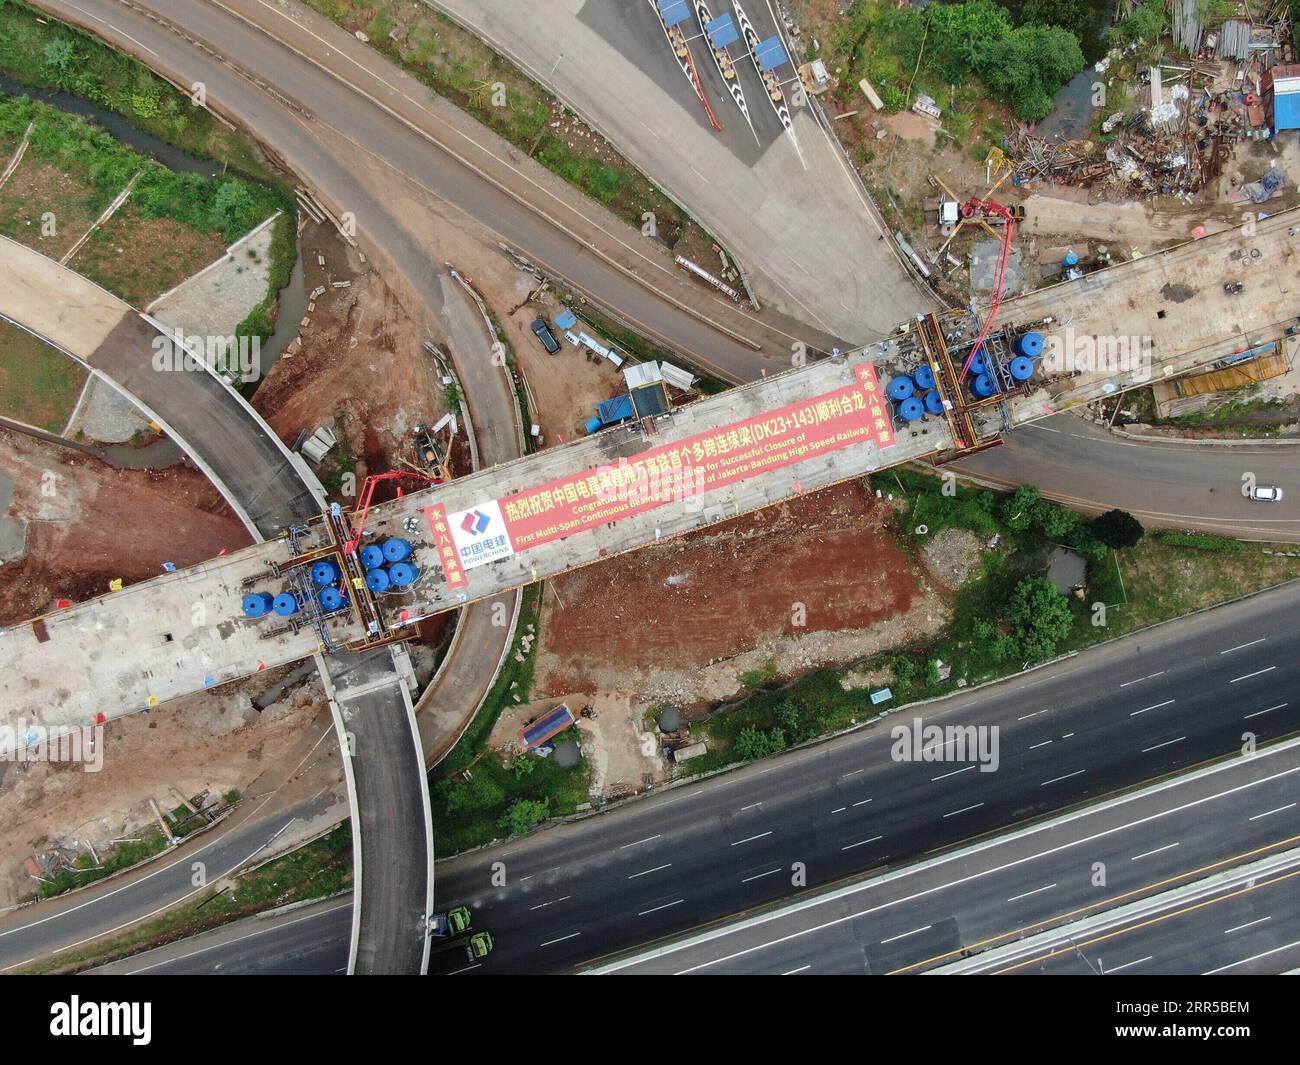 201231 -- BEIJING, Dec. 31, 2020 -- Aerial photo taken on May 10, 2020 shows the multi-span rigid frame continuous beam for the No.2 Bridge of the Jakarta-Bandung High Speed Railway in Indonesia. The construction of the 142-kilometer Jakarta-Bandung High Speed Railway project with a designed speed of 350 kilometers per hour, was launched in 2016 and built with Chinese technology. The year 2020 has been a tough one for world economies amid the global COVID-19 pandemic. Against this backdrop, China has seen resilient cooperation with the Belt and Road B&R countries. As the coronavirus pandemic s Stock Photo